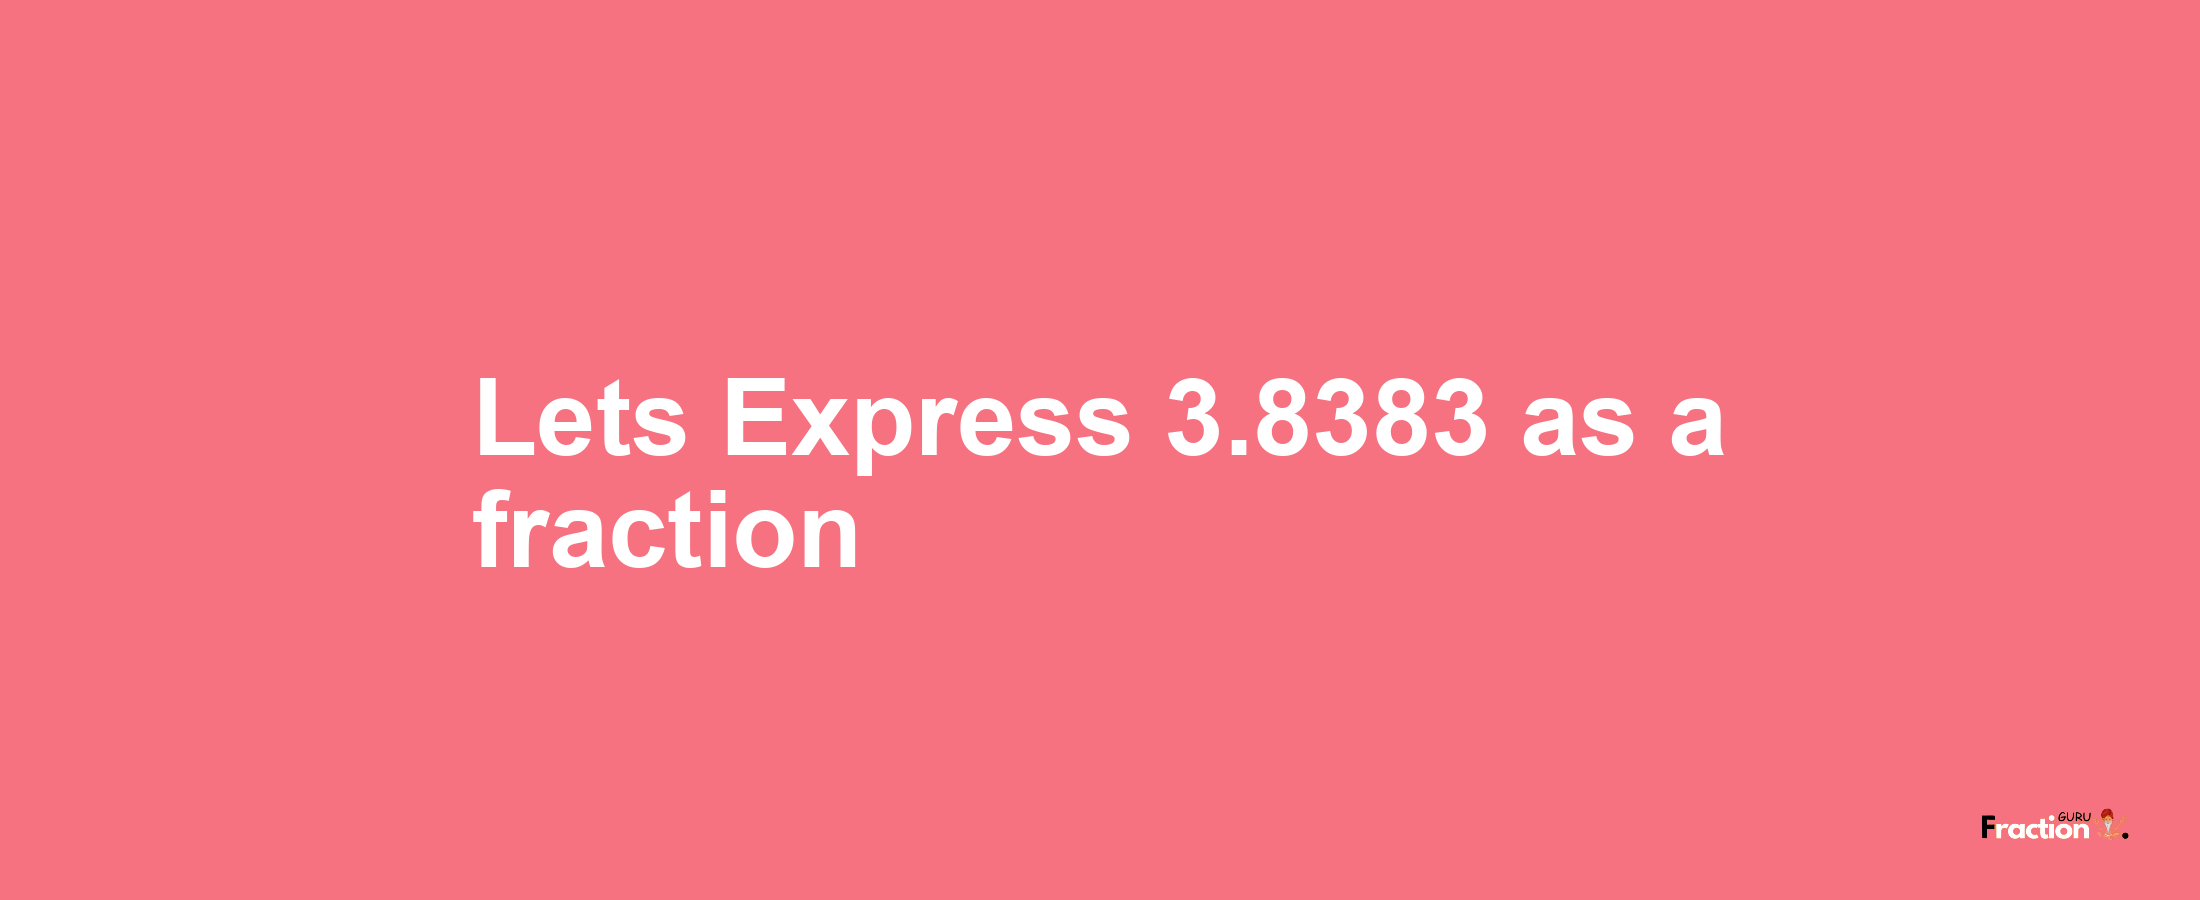 Lets Express 3.8383 as afraction